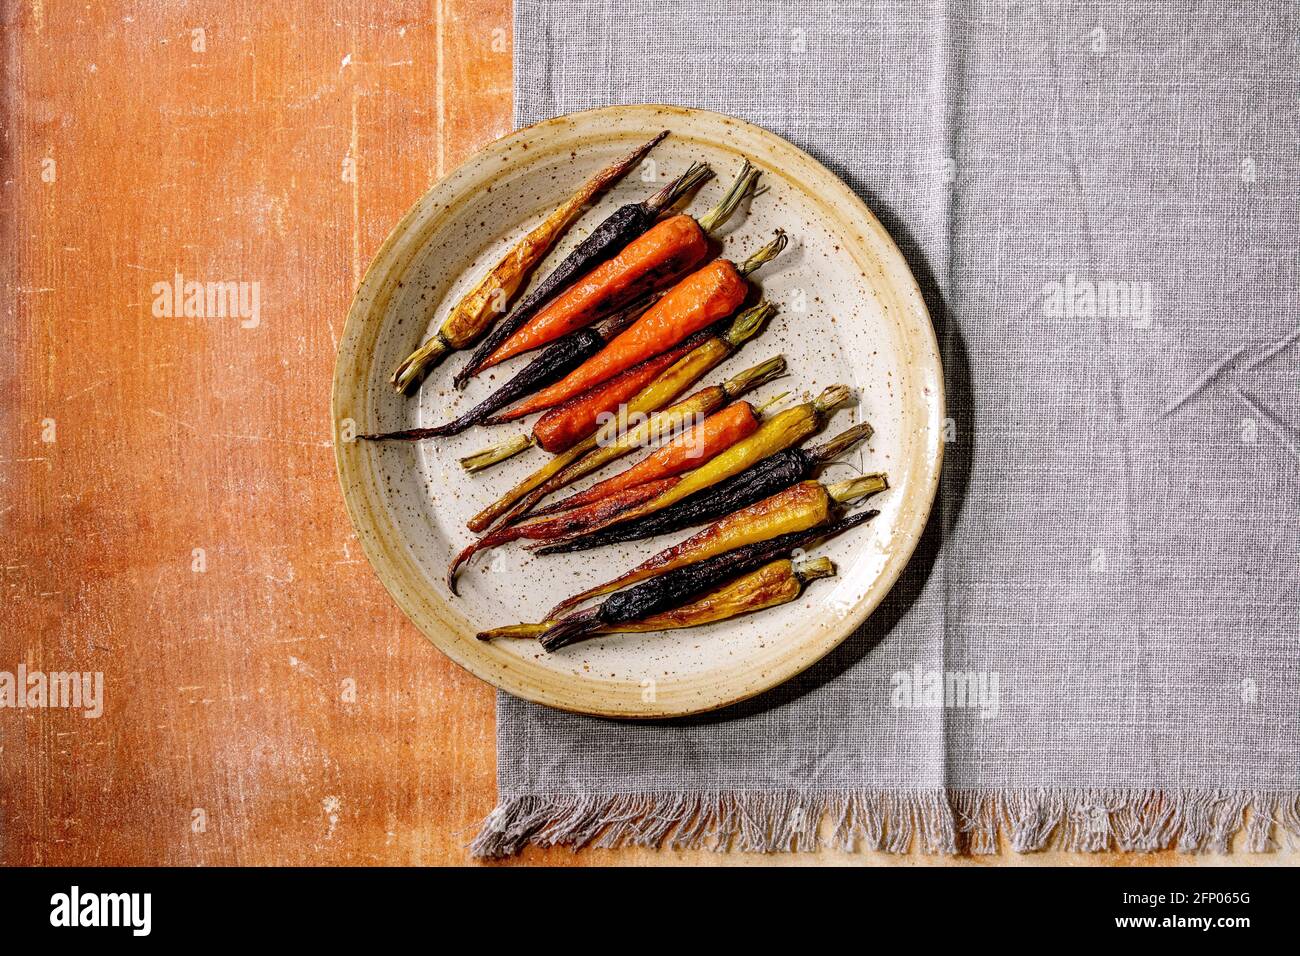 Grilled different colored carrots on ceramic plate with grey textile napkin over orange stone background. Top view, flat lay. Copy space. Vegan dinner Stock Photo